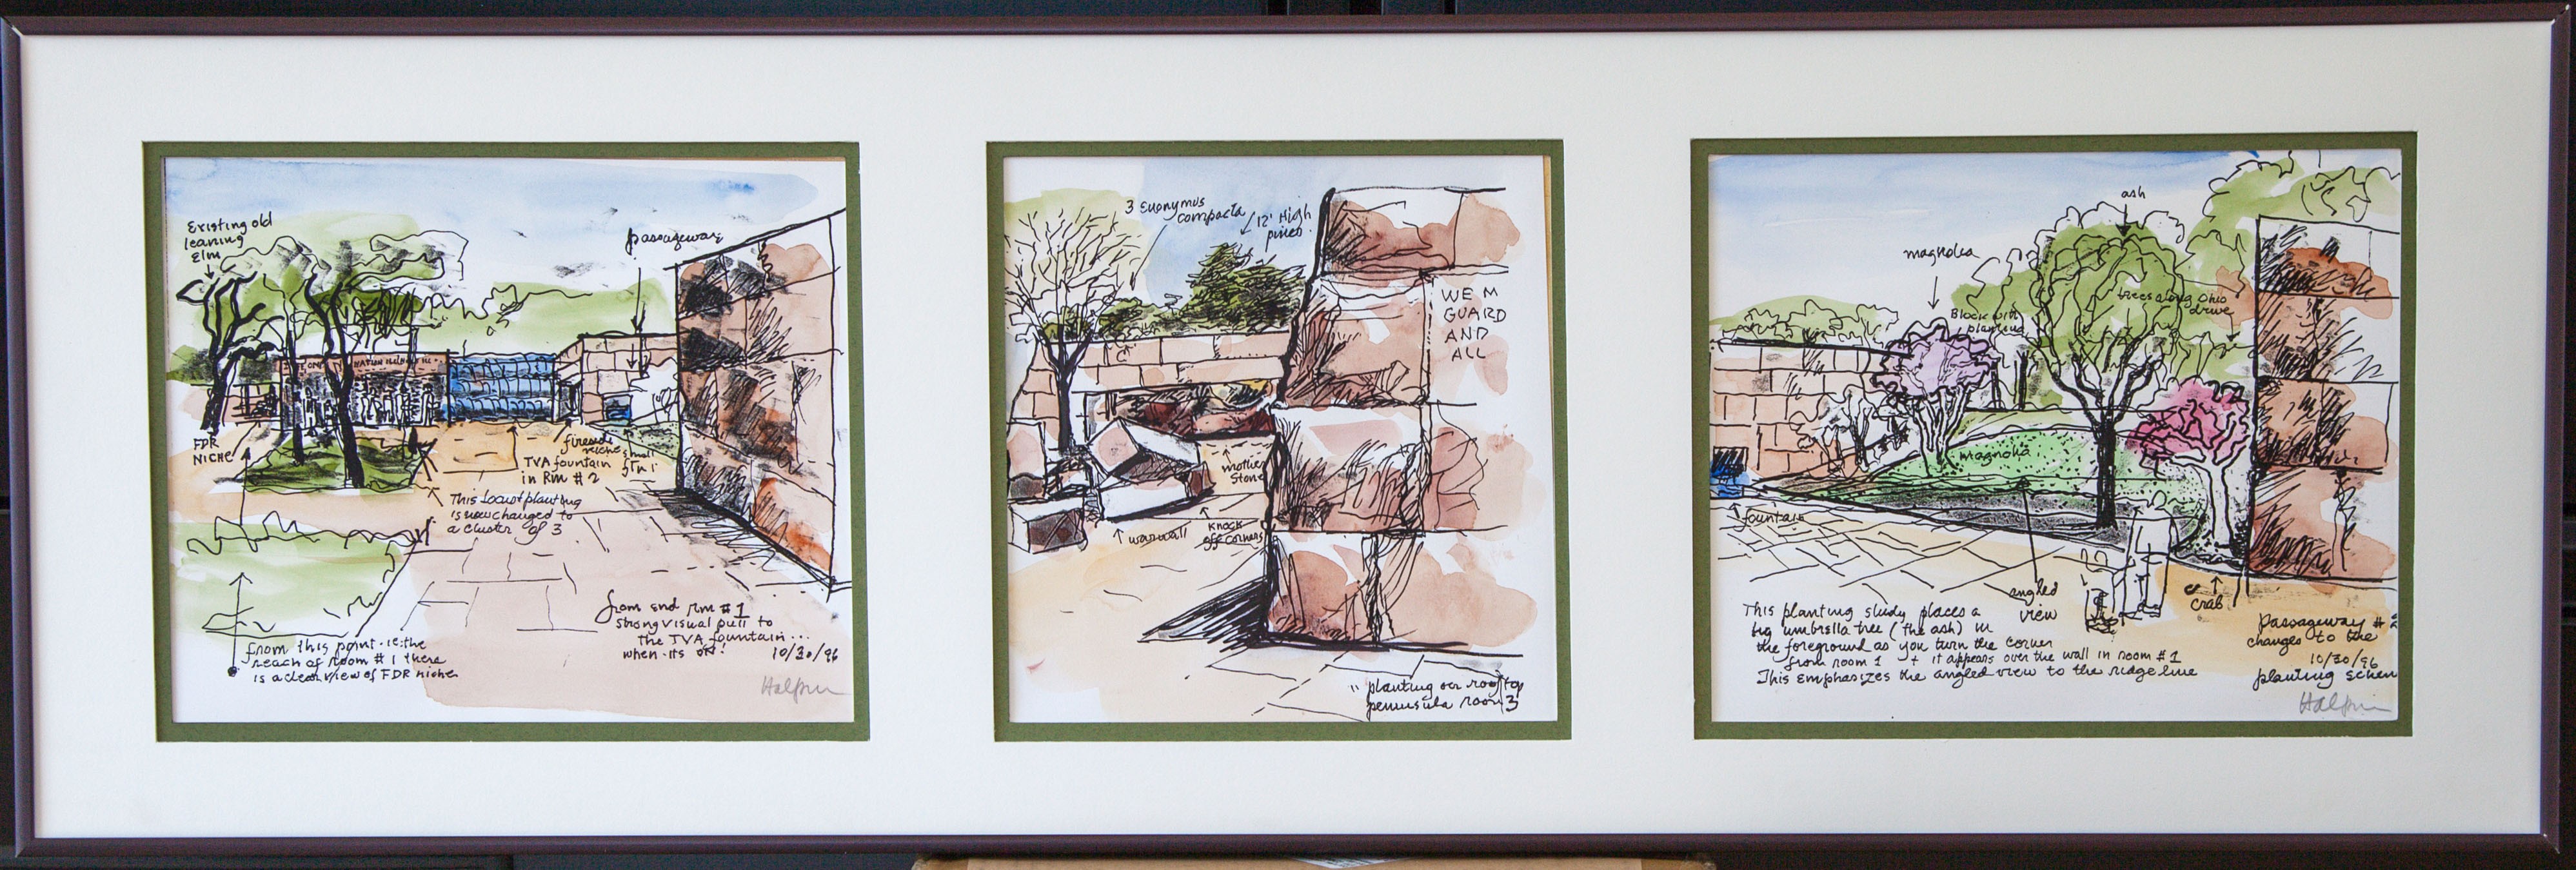 Hand colored sketches of the FDR Memorial by Lawrence Halprin